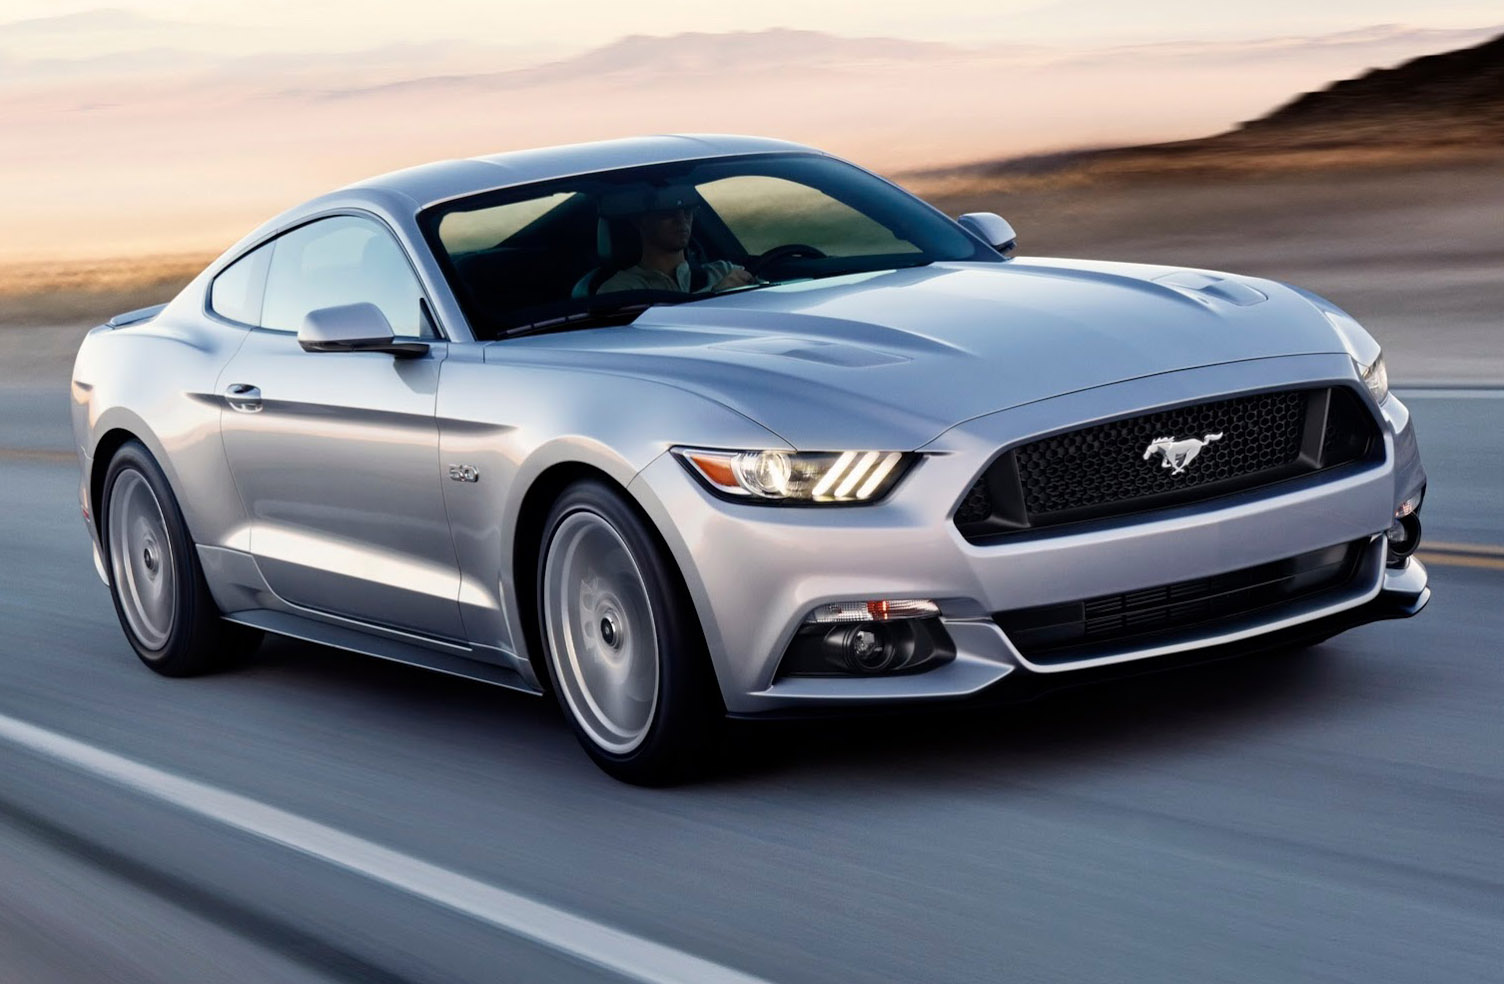 http://ronnielogues.com/wp-content/uploads/2014/03/Ford-Mustang.jpg